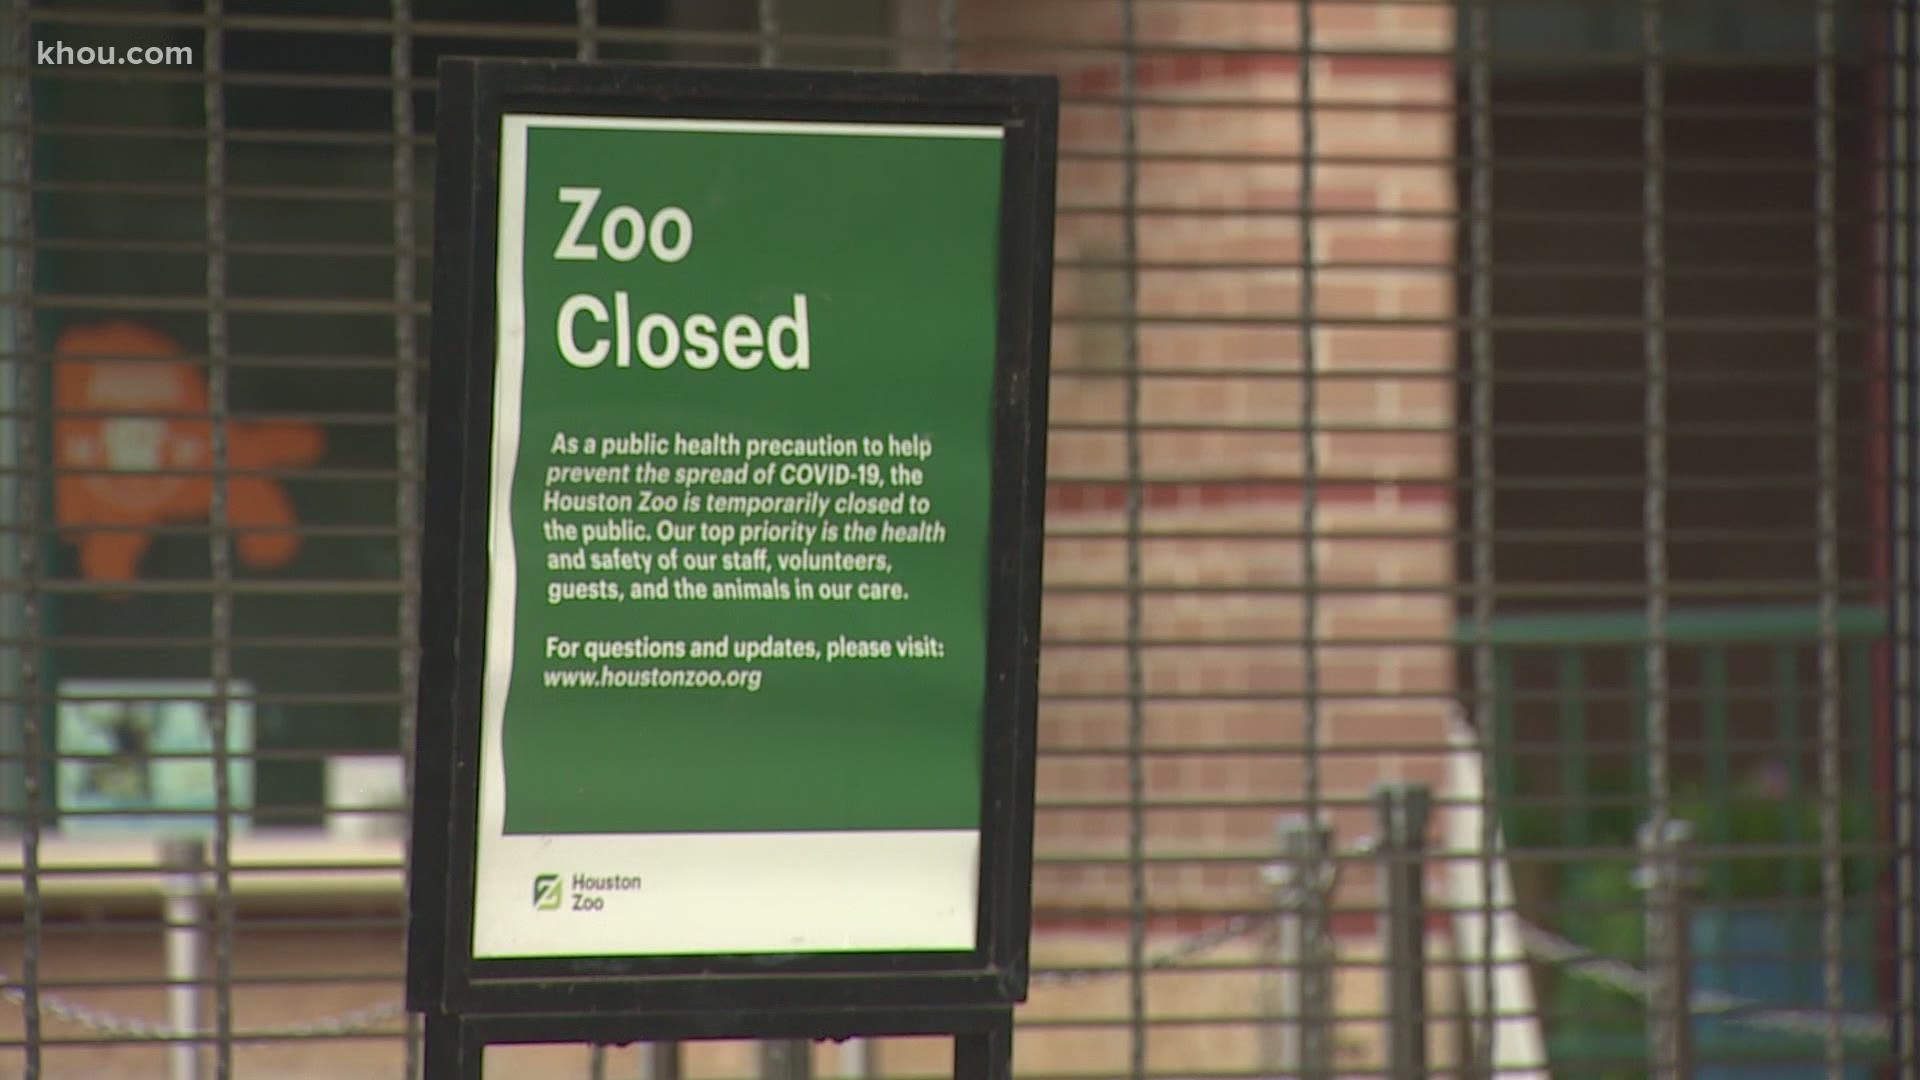 Guests must make reservations online and are “highly encouraged” to use face-coverings or masks to help protect the Zoo’s staff, other guests and the animals.